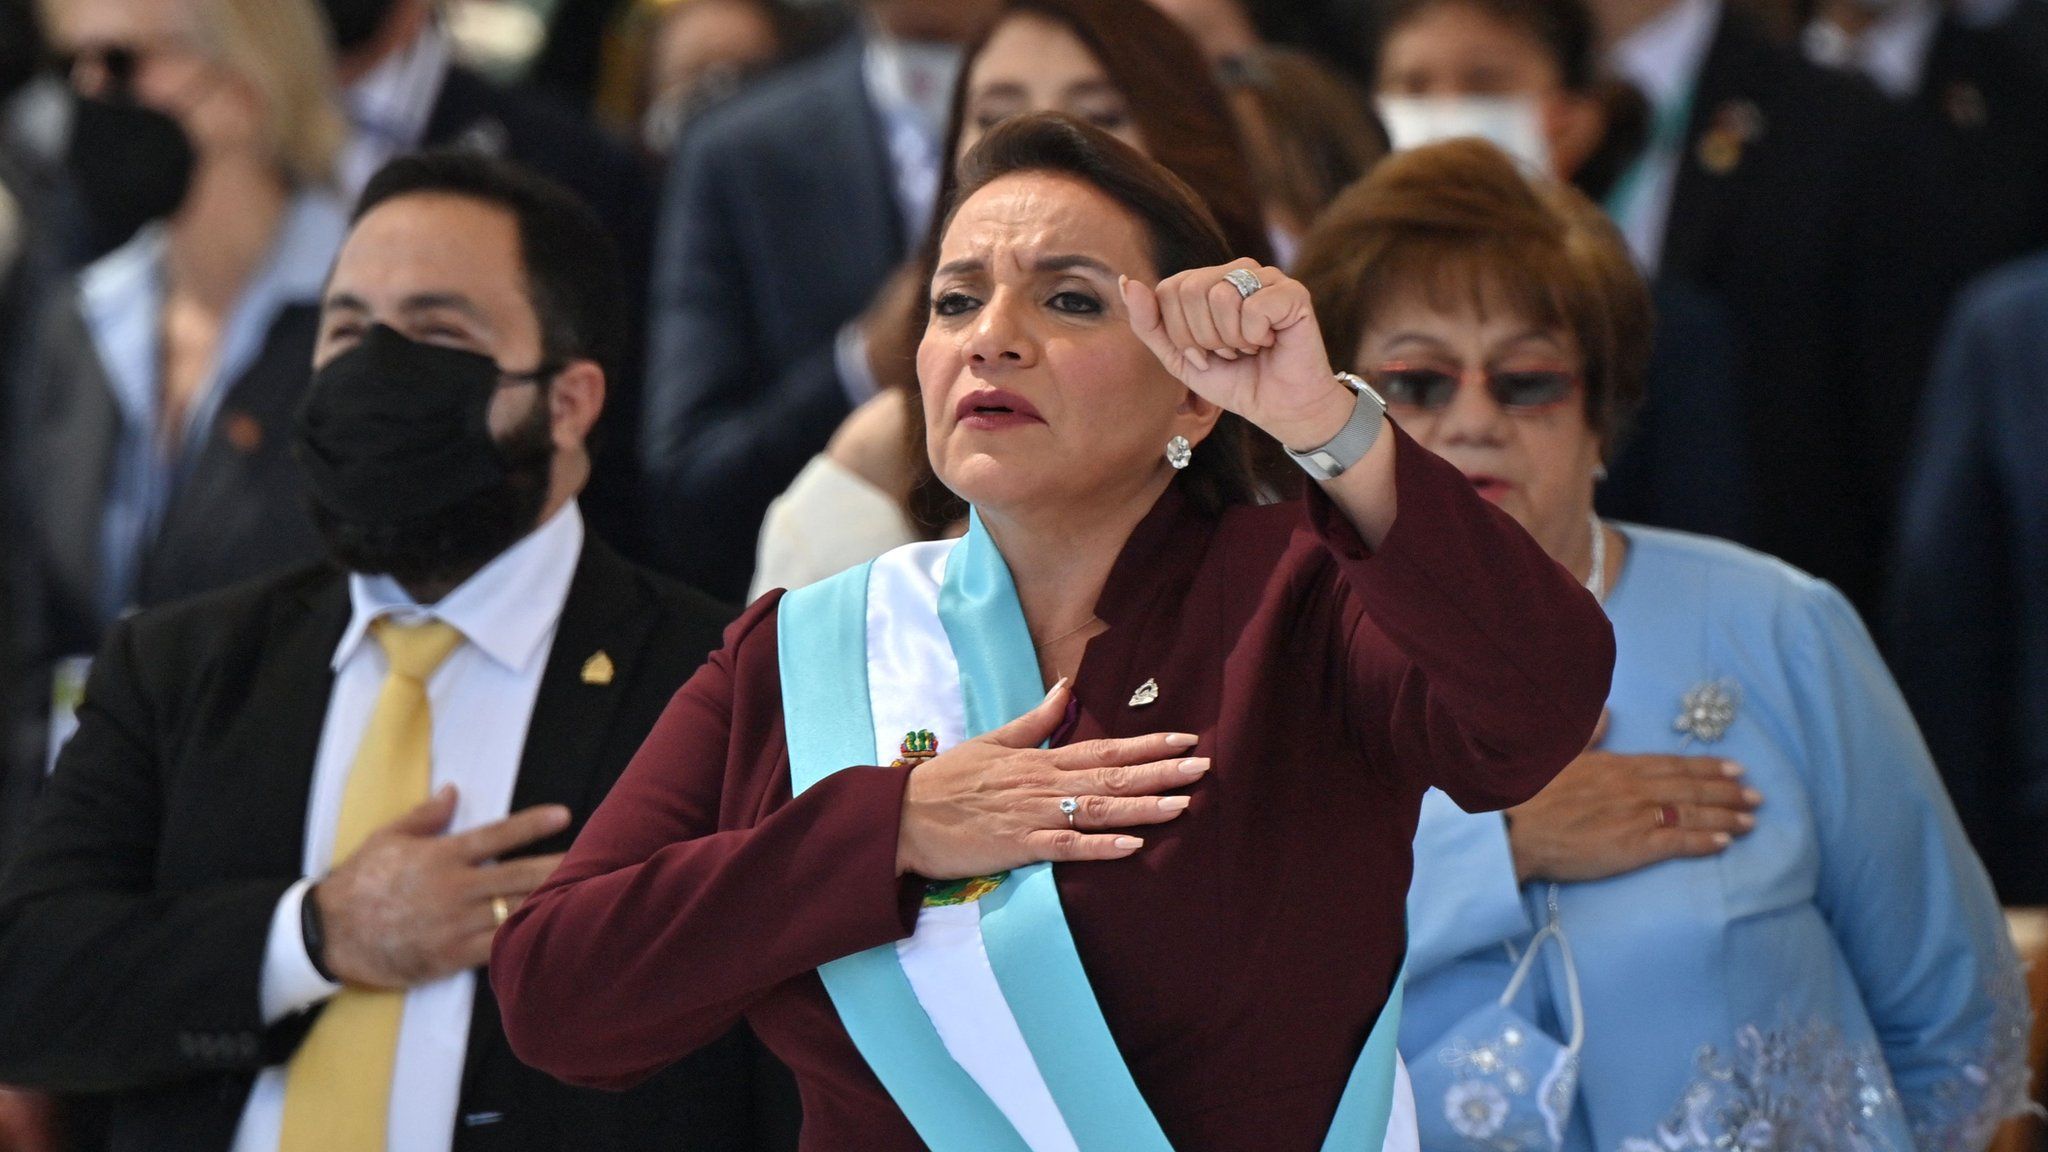 Honduran president-elect Xiomara Castro holds up her clenched fist as she wears the presidential sash after swearing in during her inauguration ceremony, in Tegucigalpa, on January 27, 2022.